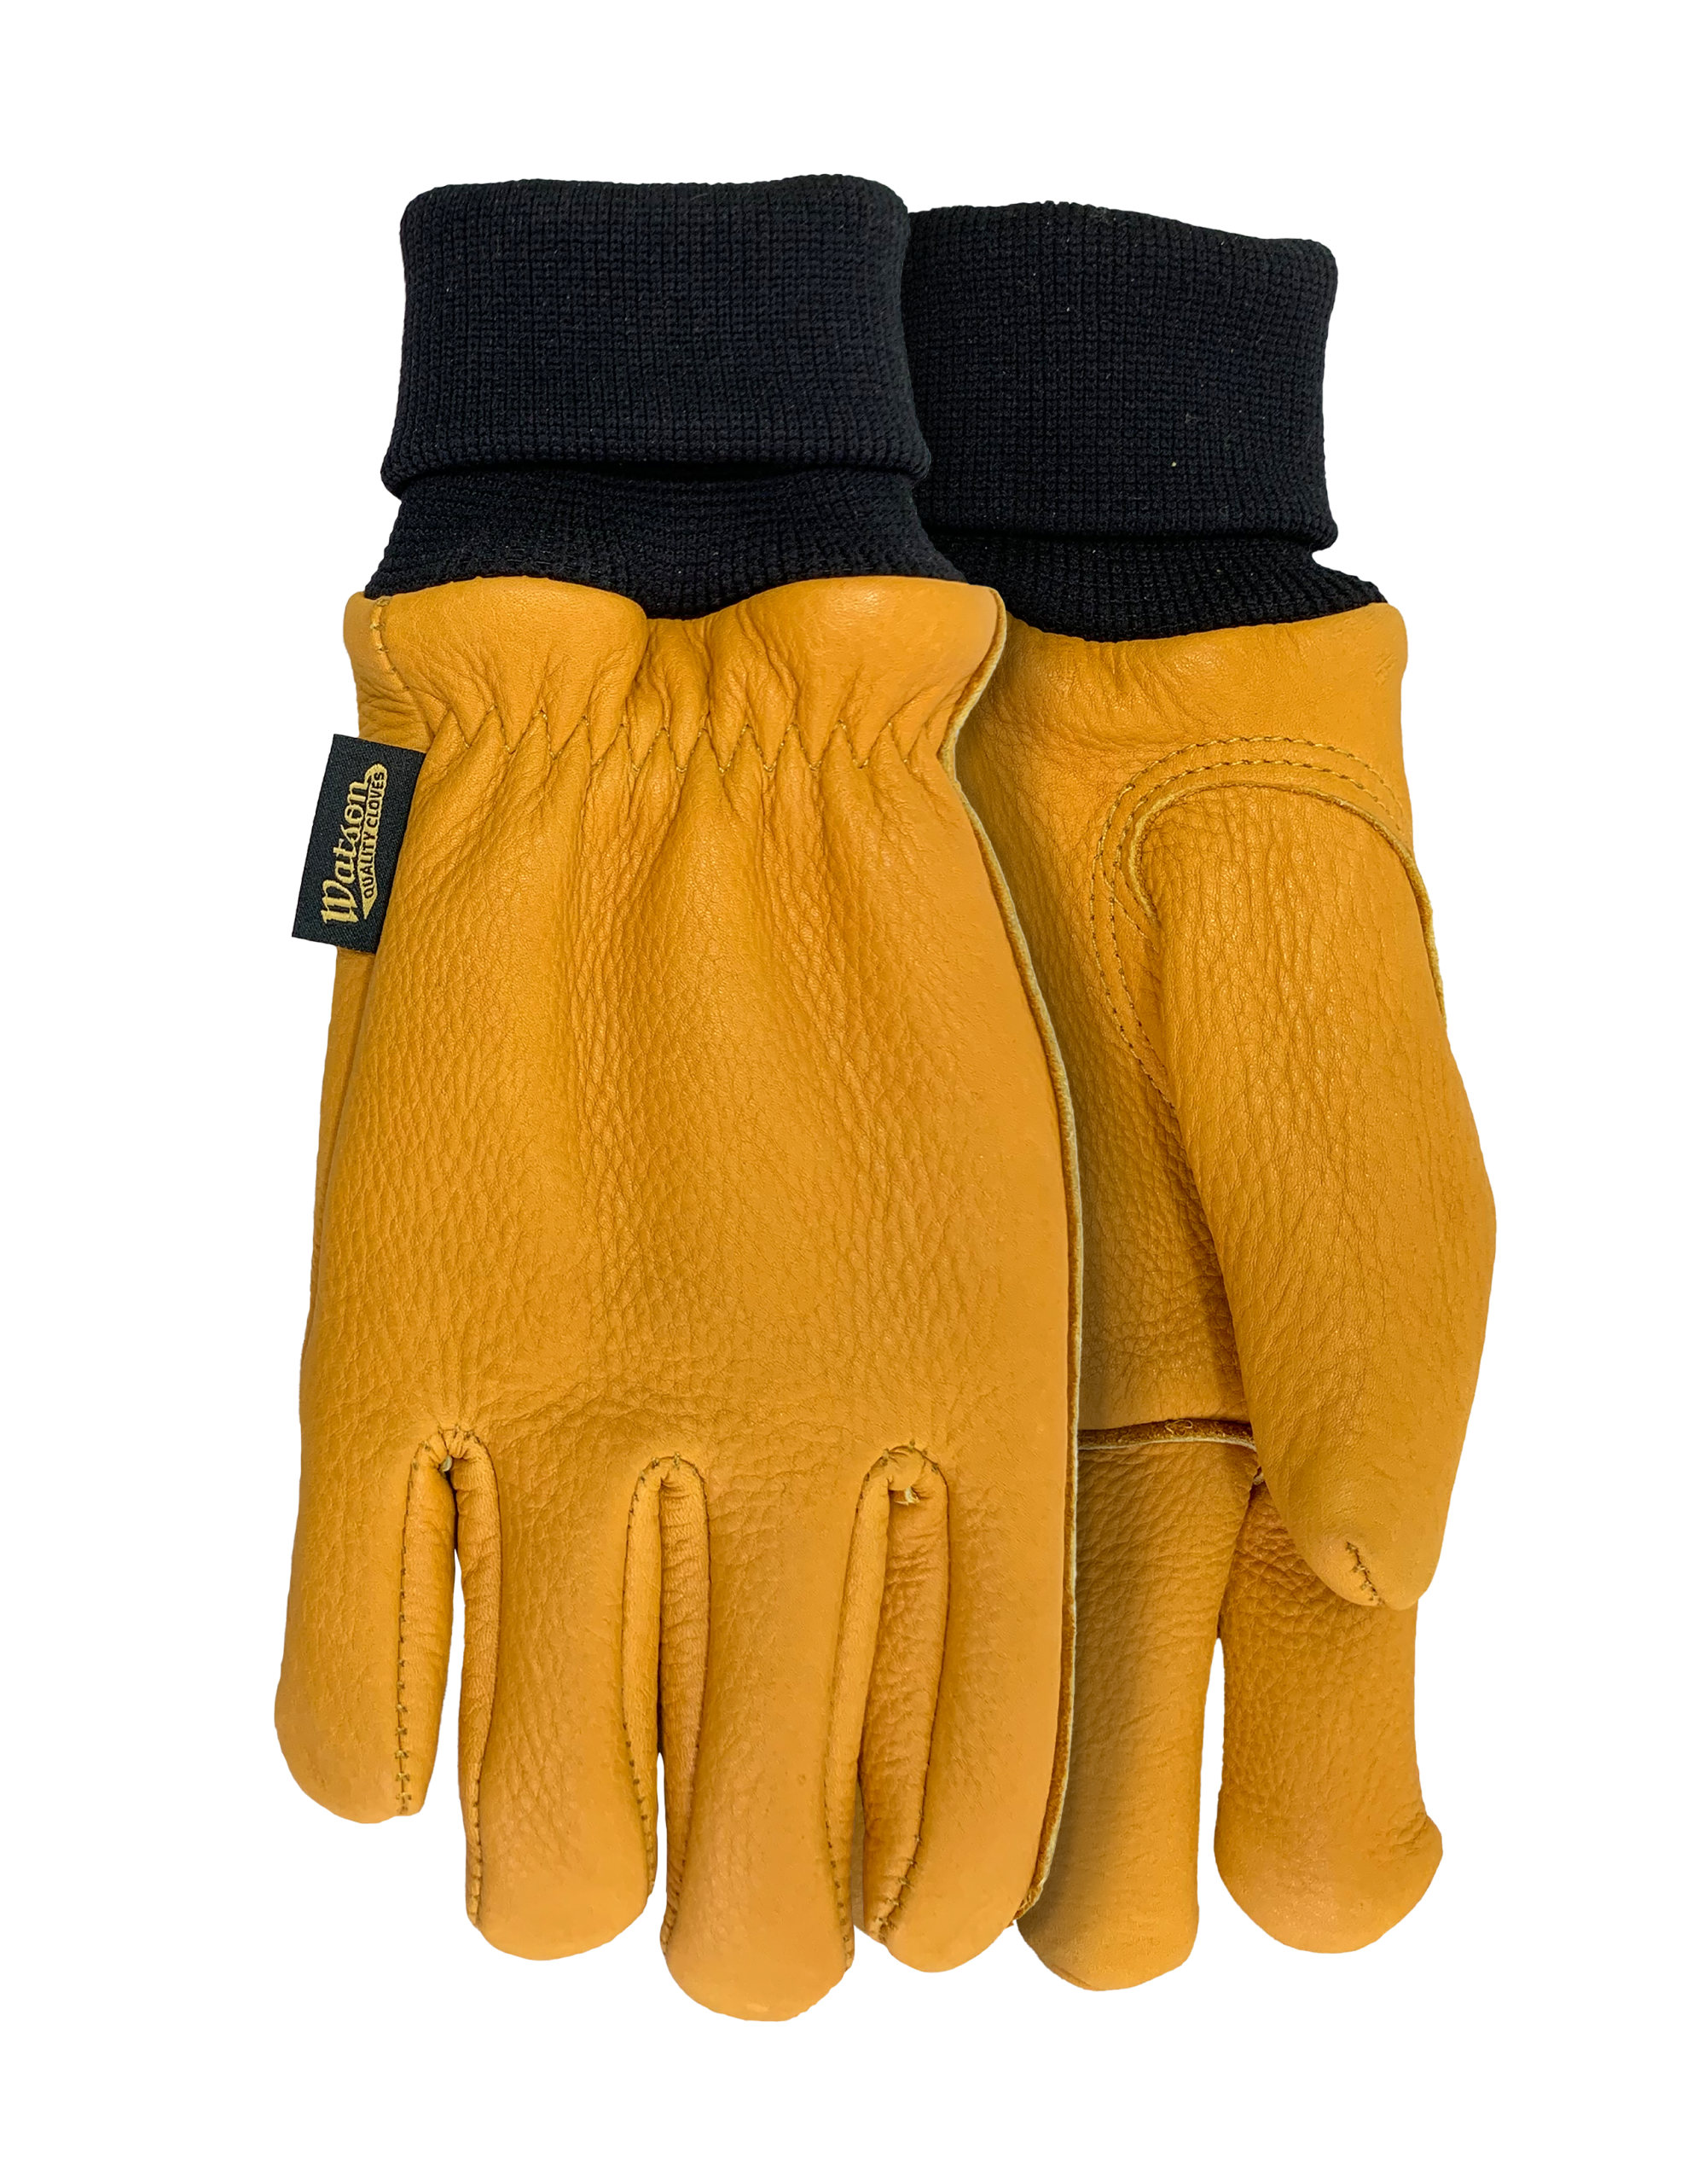 9597CKW The Duke Premium Leather Knit Wrist Winter Glove with Cotton Fleece Lining